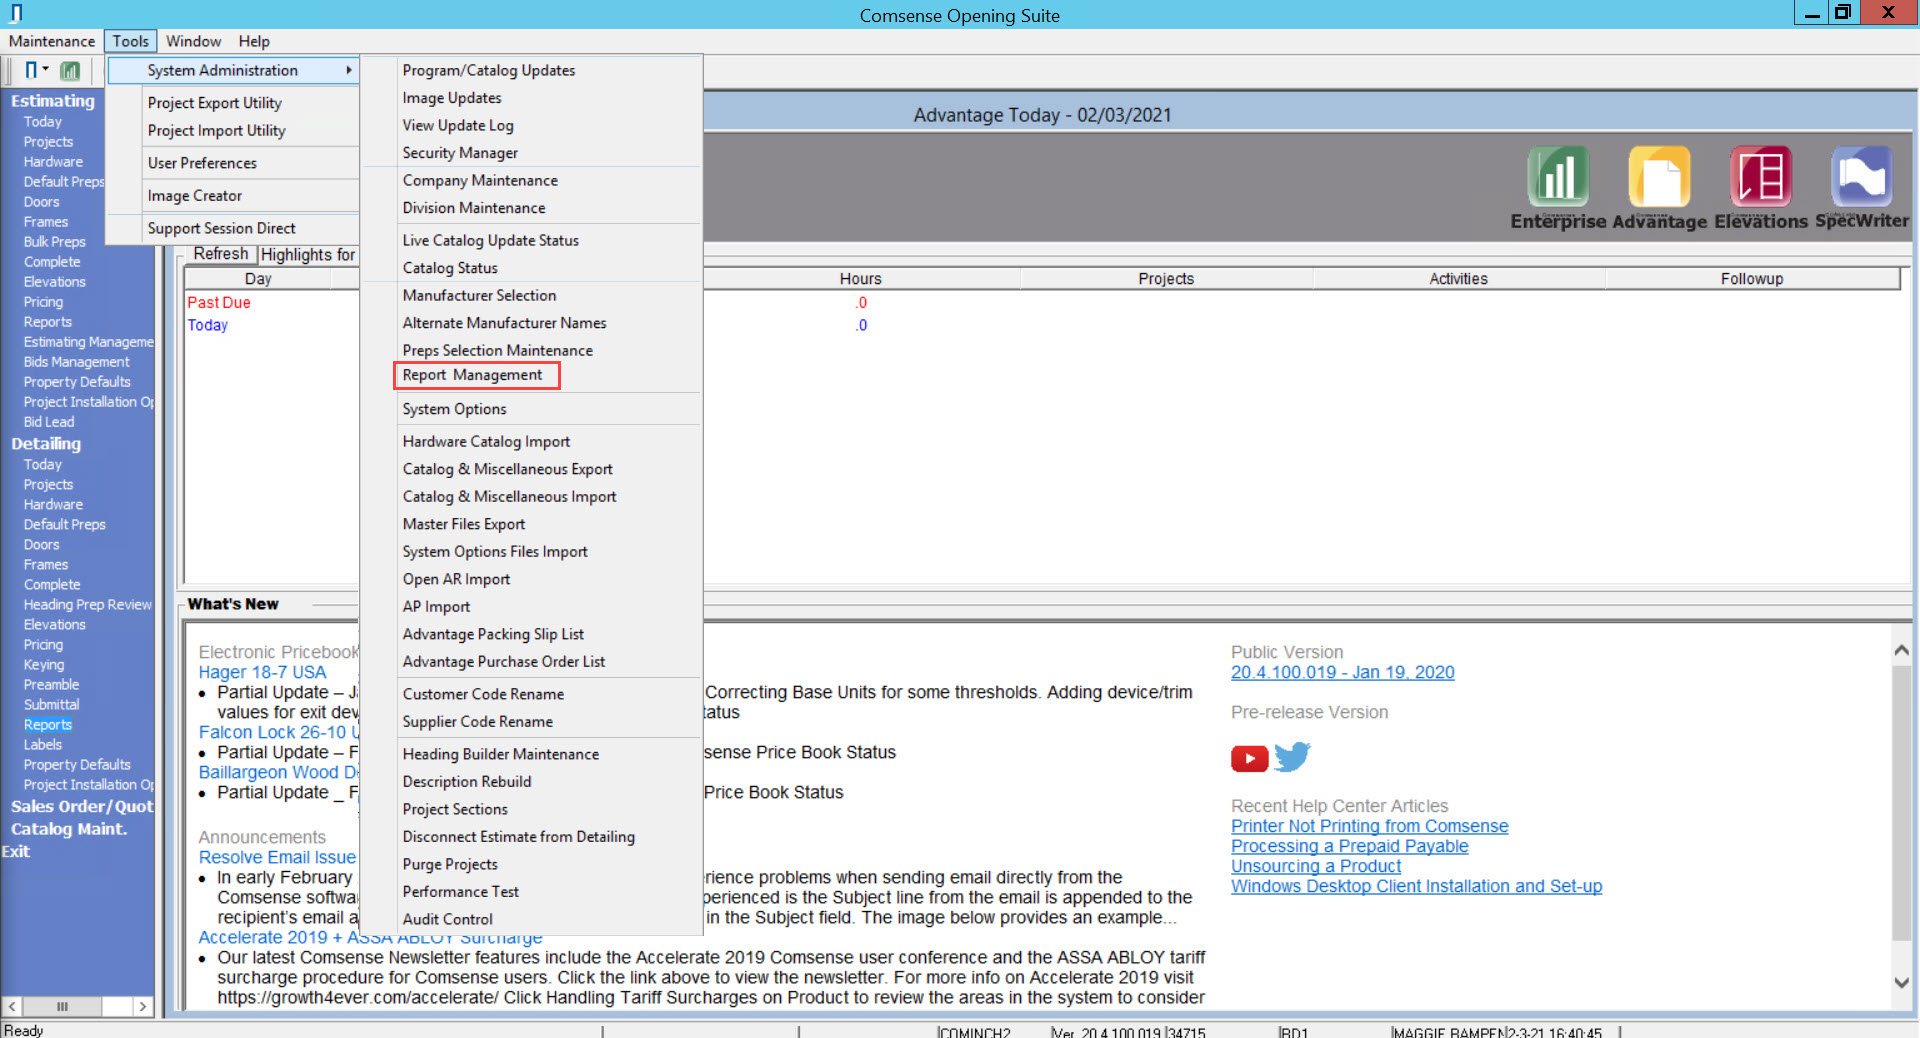 Advantage window; shows the pathway from the top tool bar to Report Management.